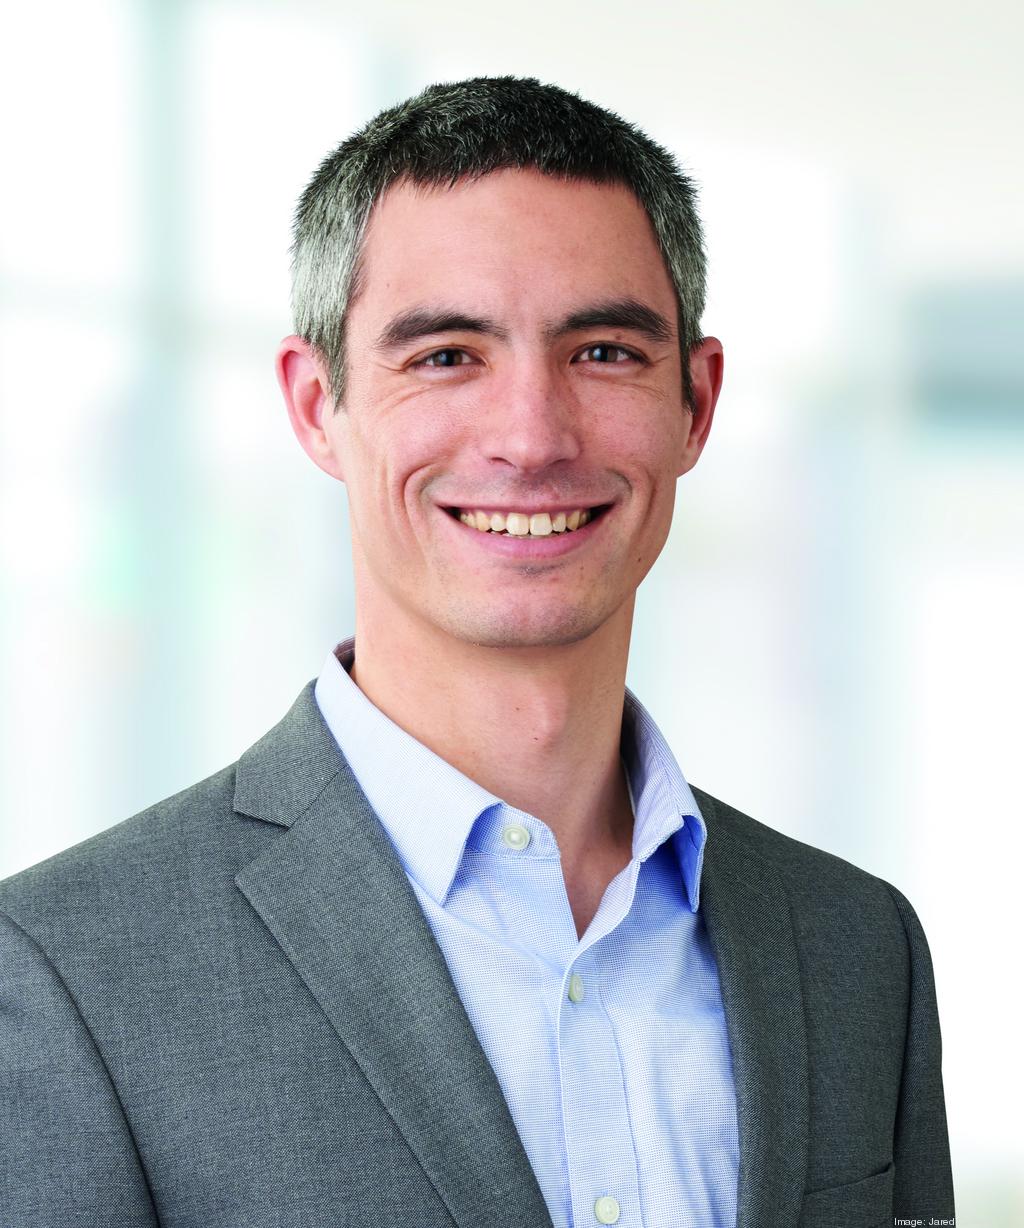 2023 40 Under 40: Dr. Eric Ling leads award-winning teams at HealthPartners  - Minneapolis / St. Paul Business Journal